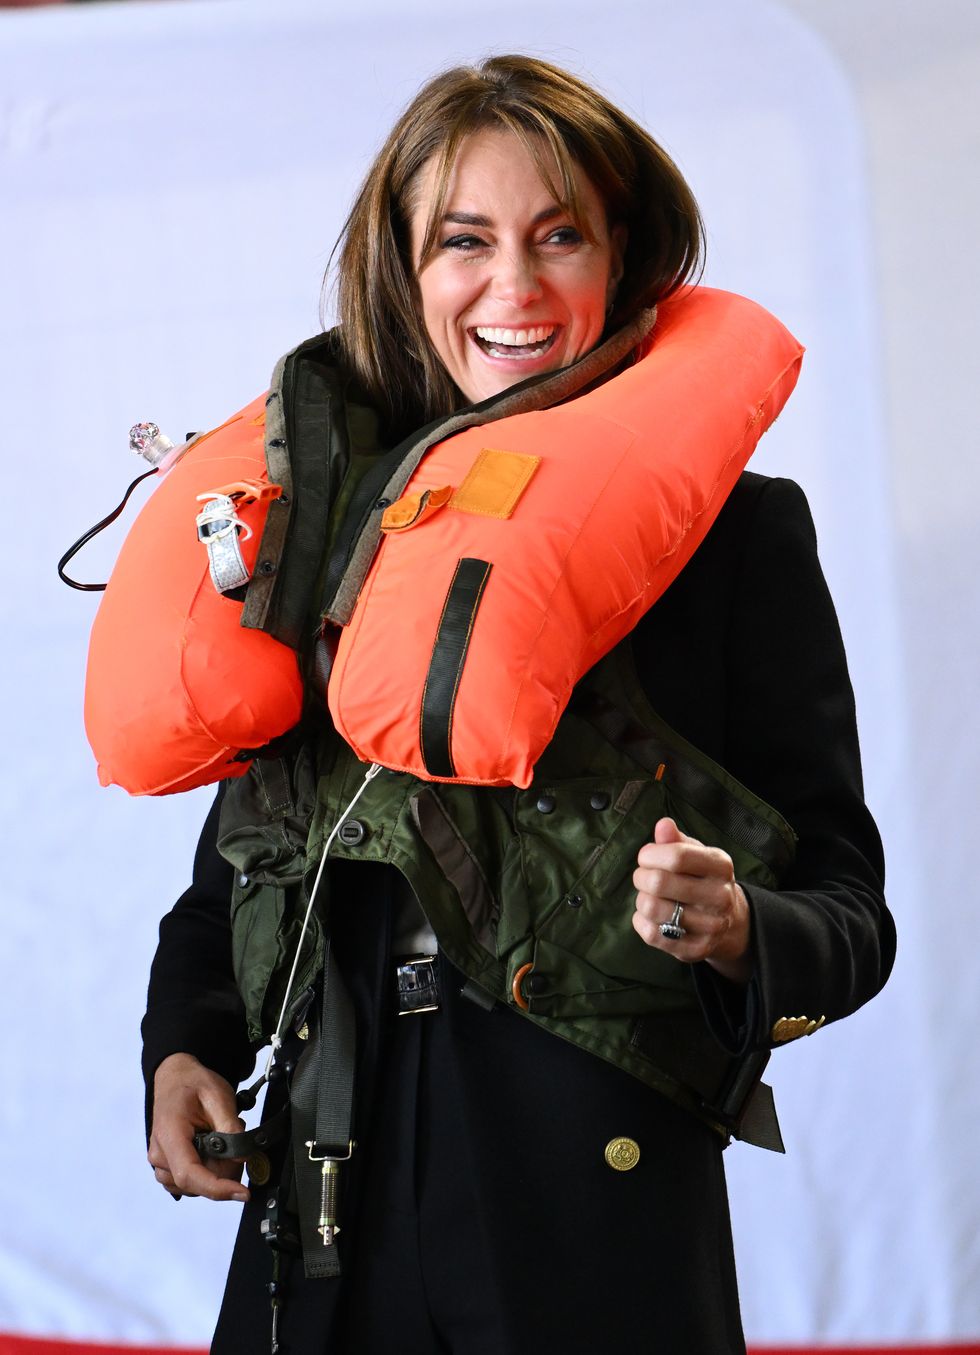 yeovil, england september 18 catherine, princess of wales inflates an emergency life preserver issued to royal navy aircrews during her visit to royal naval air station yeovilton on september 18, 2023 in yeovil, england the princess of wales is visiting the airbase following her appoint as commodore in chief, fleet air arm faa photo by karwai tangwireimage